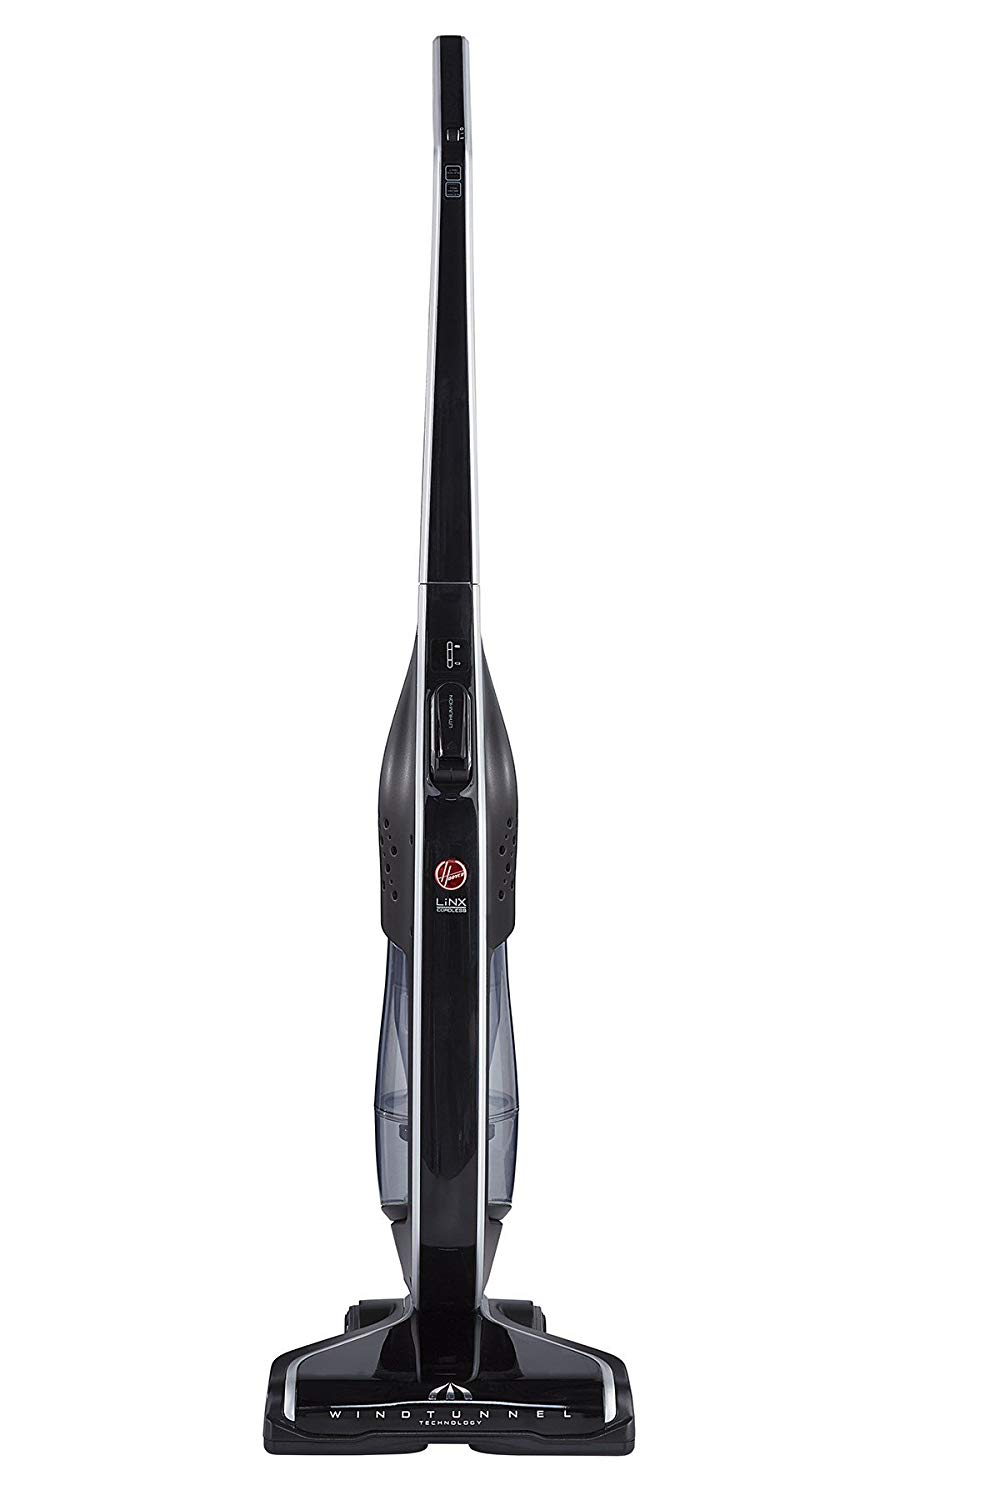 Hoover BH50020PC Linx Signature Cordless